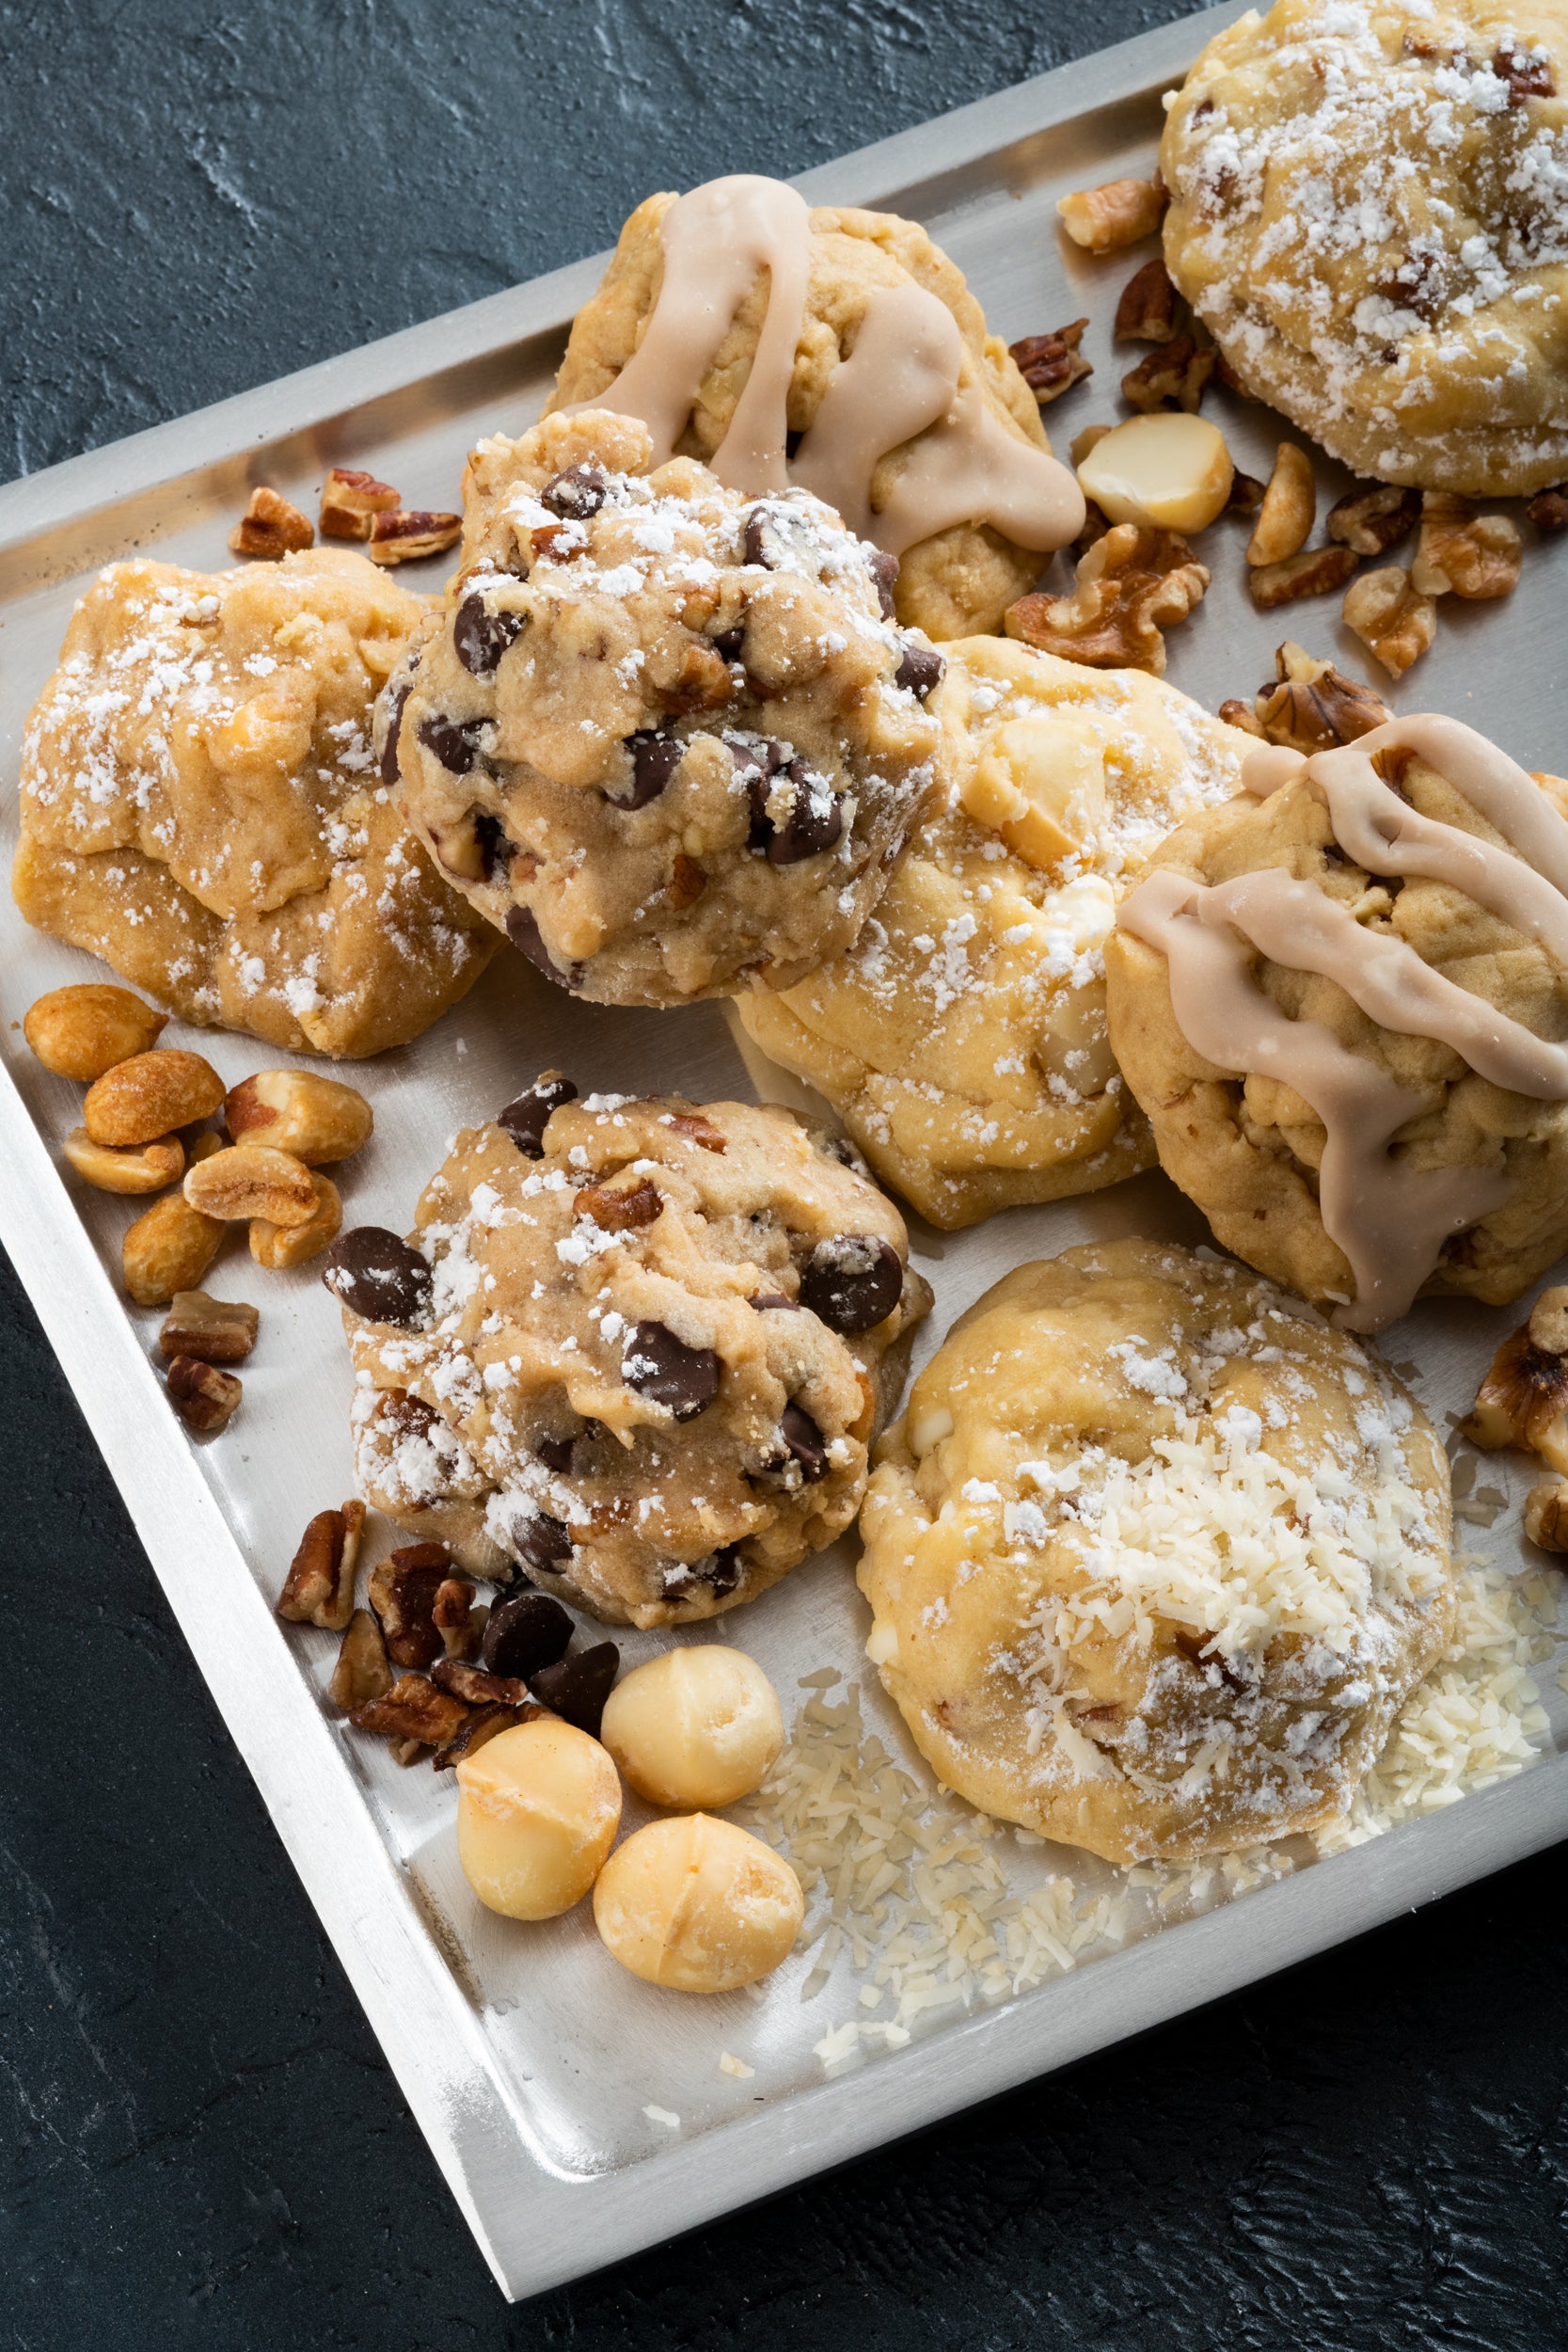 All our nut cookies on a platter.